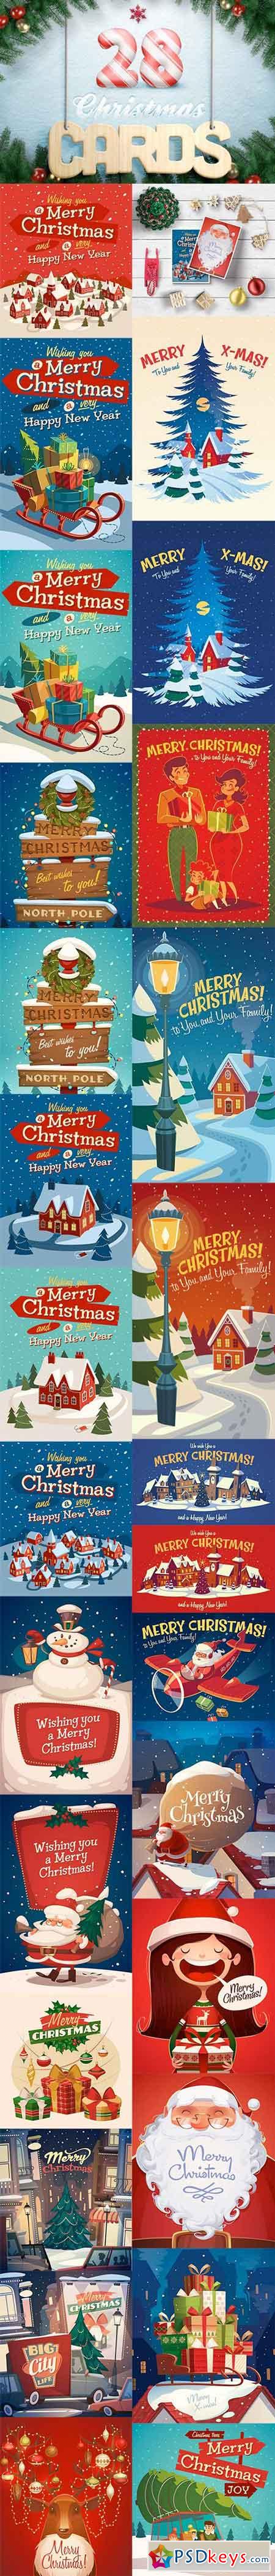 28 Christmas Cards Illustrations 1018032